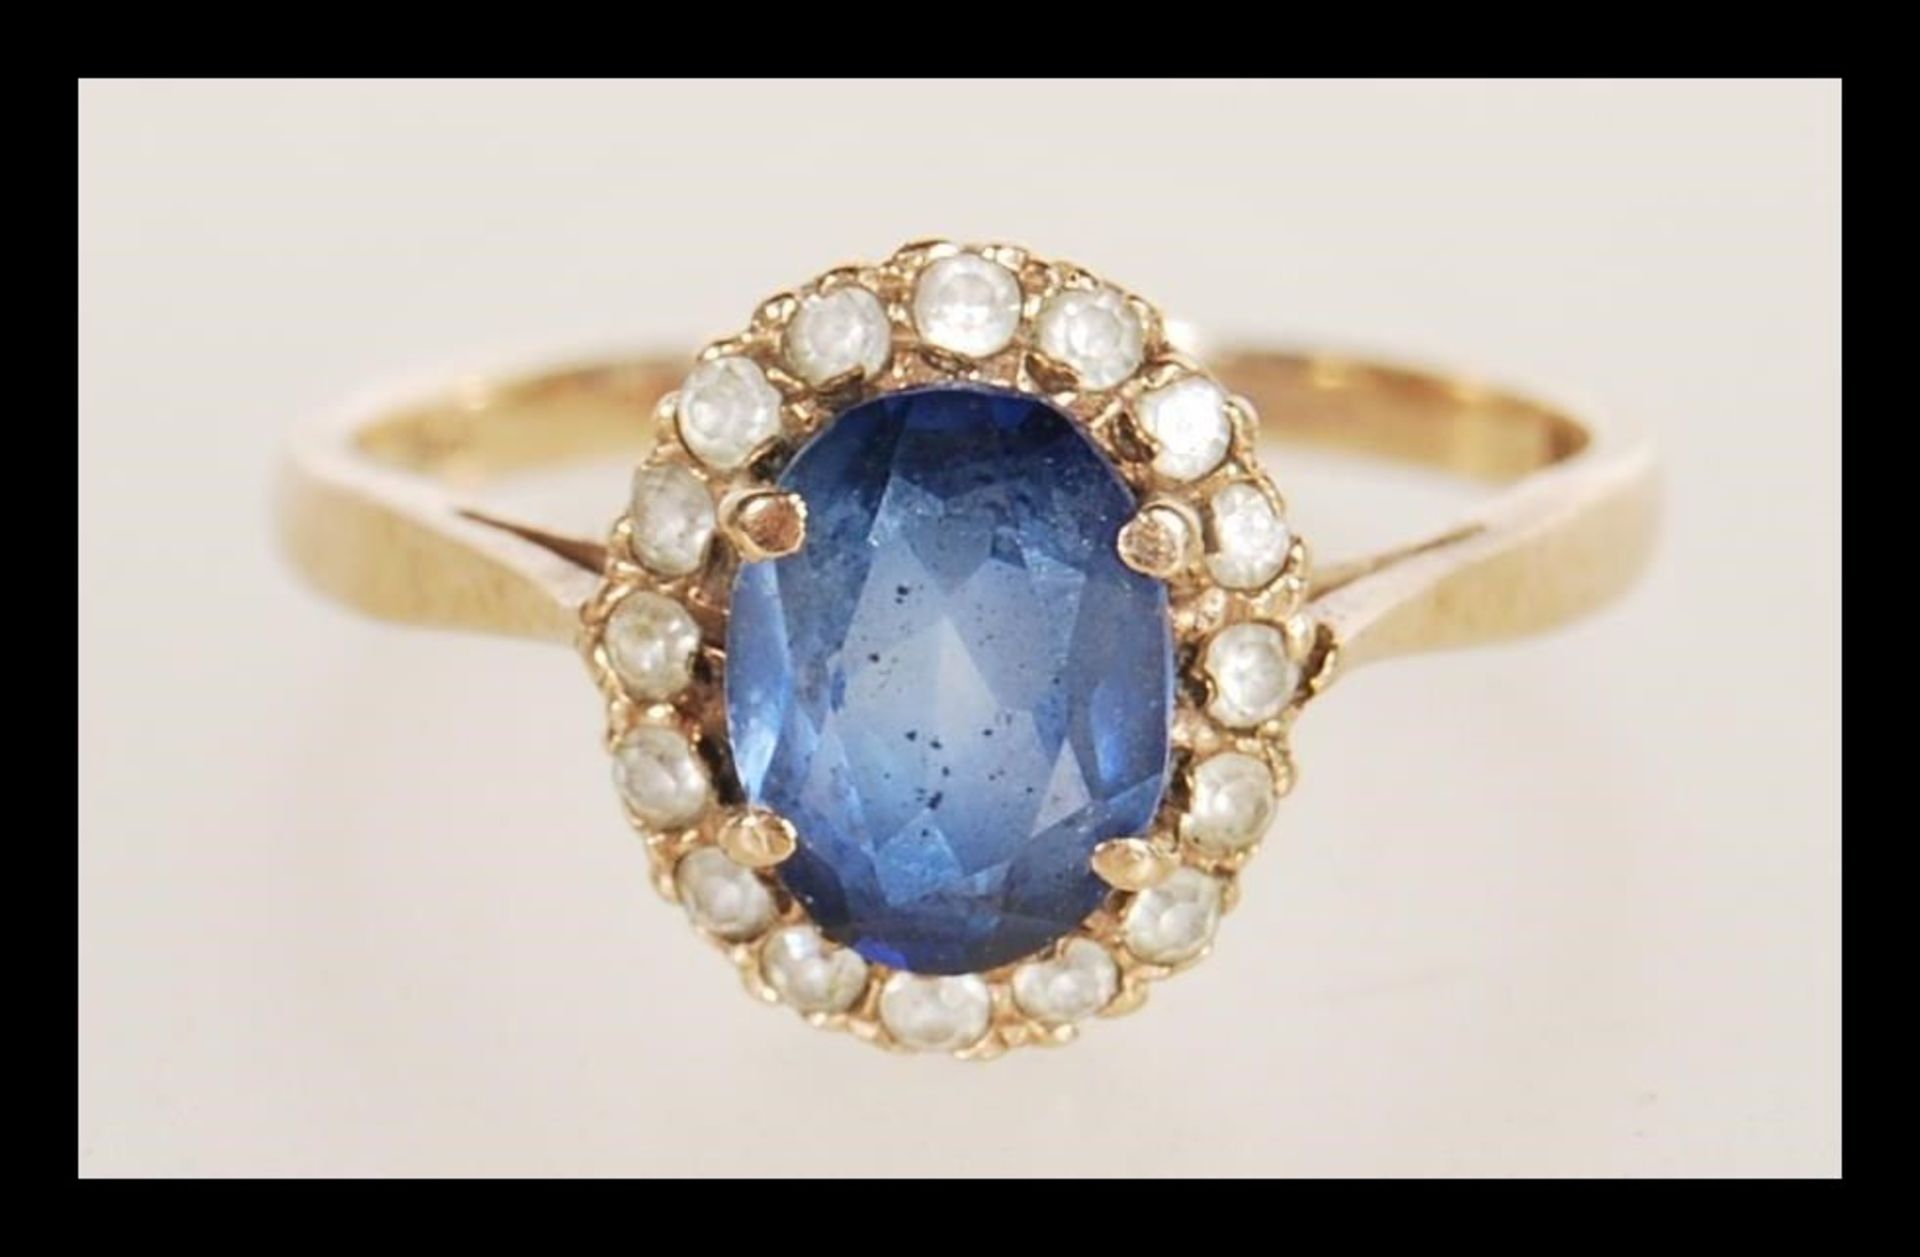 A hallmarked 9ct gold ring prong set with an oval cut synthetic sapphire set with a halo of white